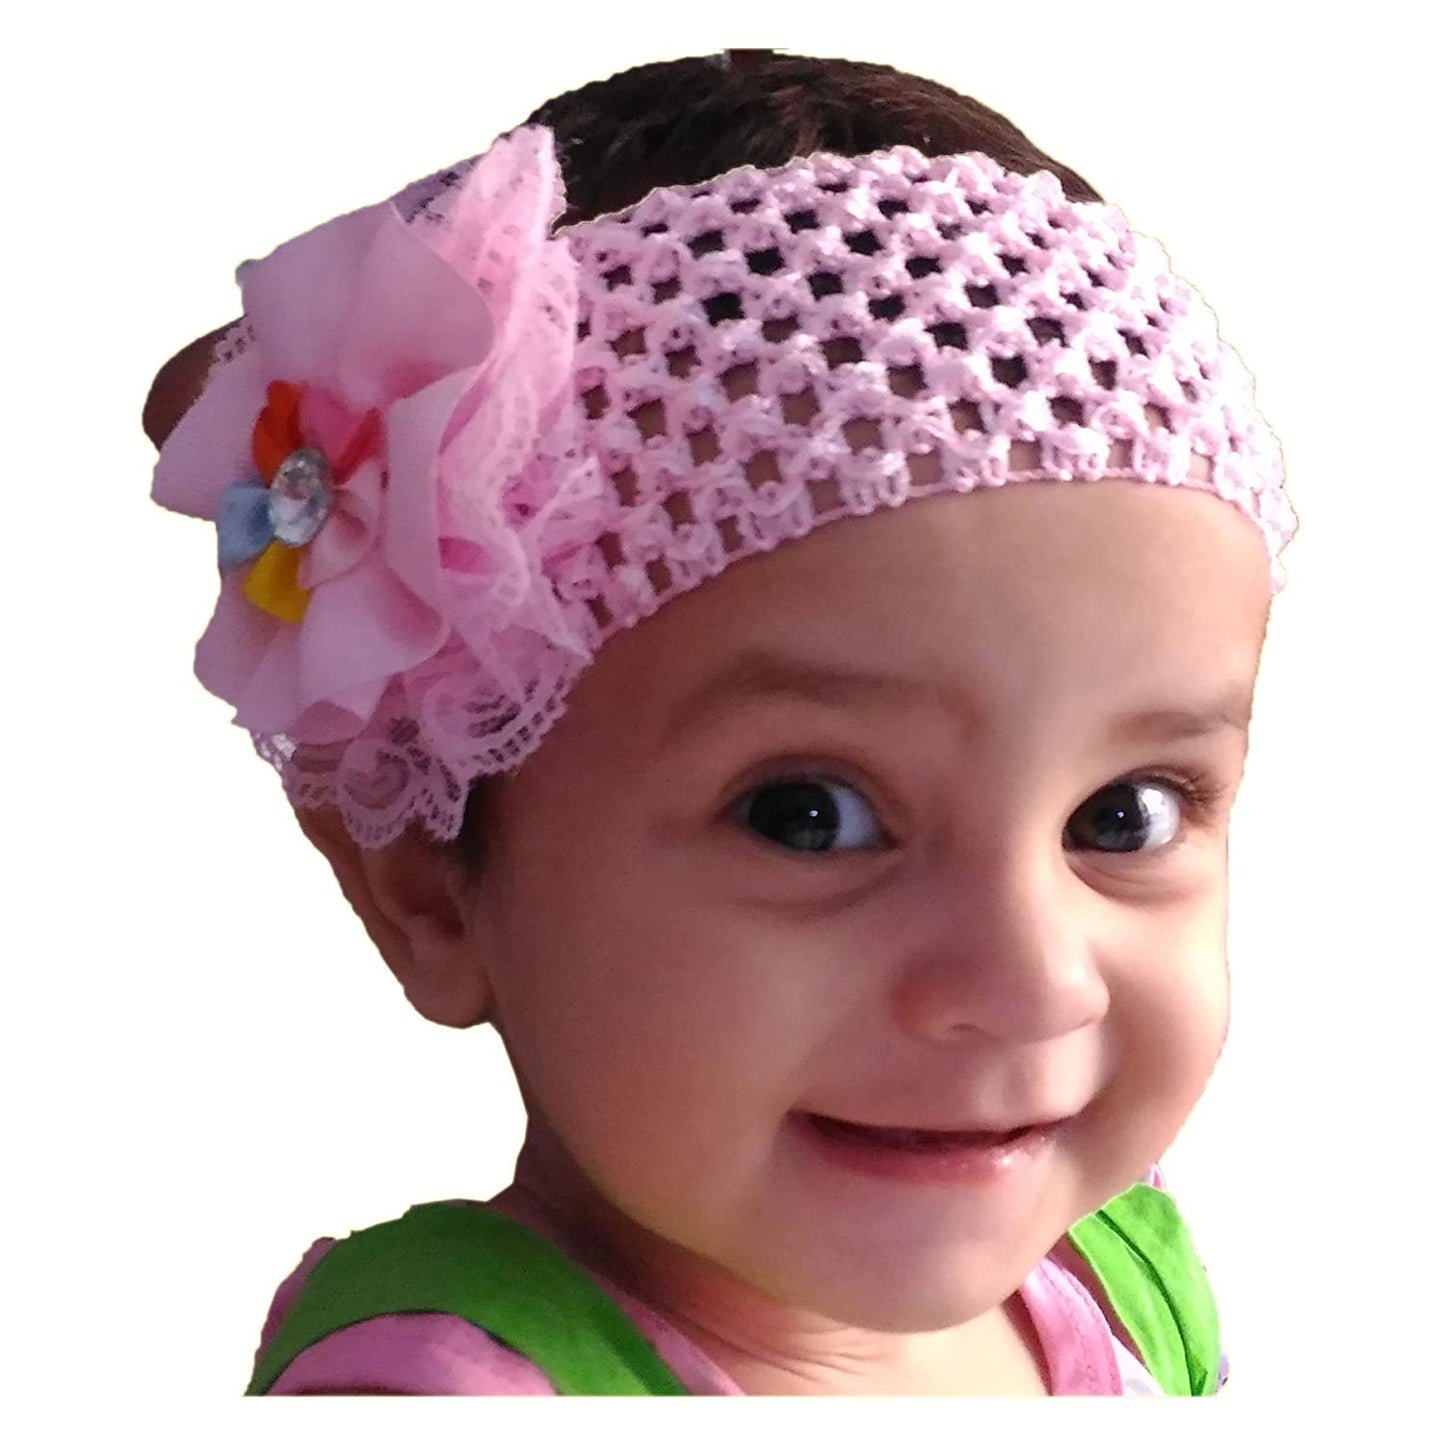 Floral Soft Stretchy Headbands for Baby Girls and Newborn (17-13 Sky Blue Baby Headband)